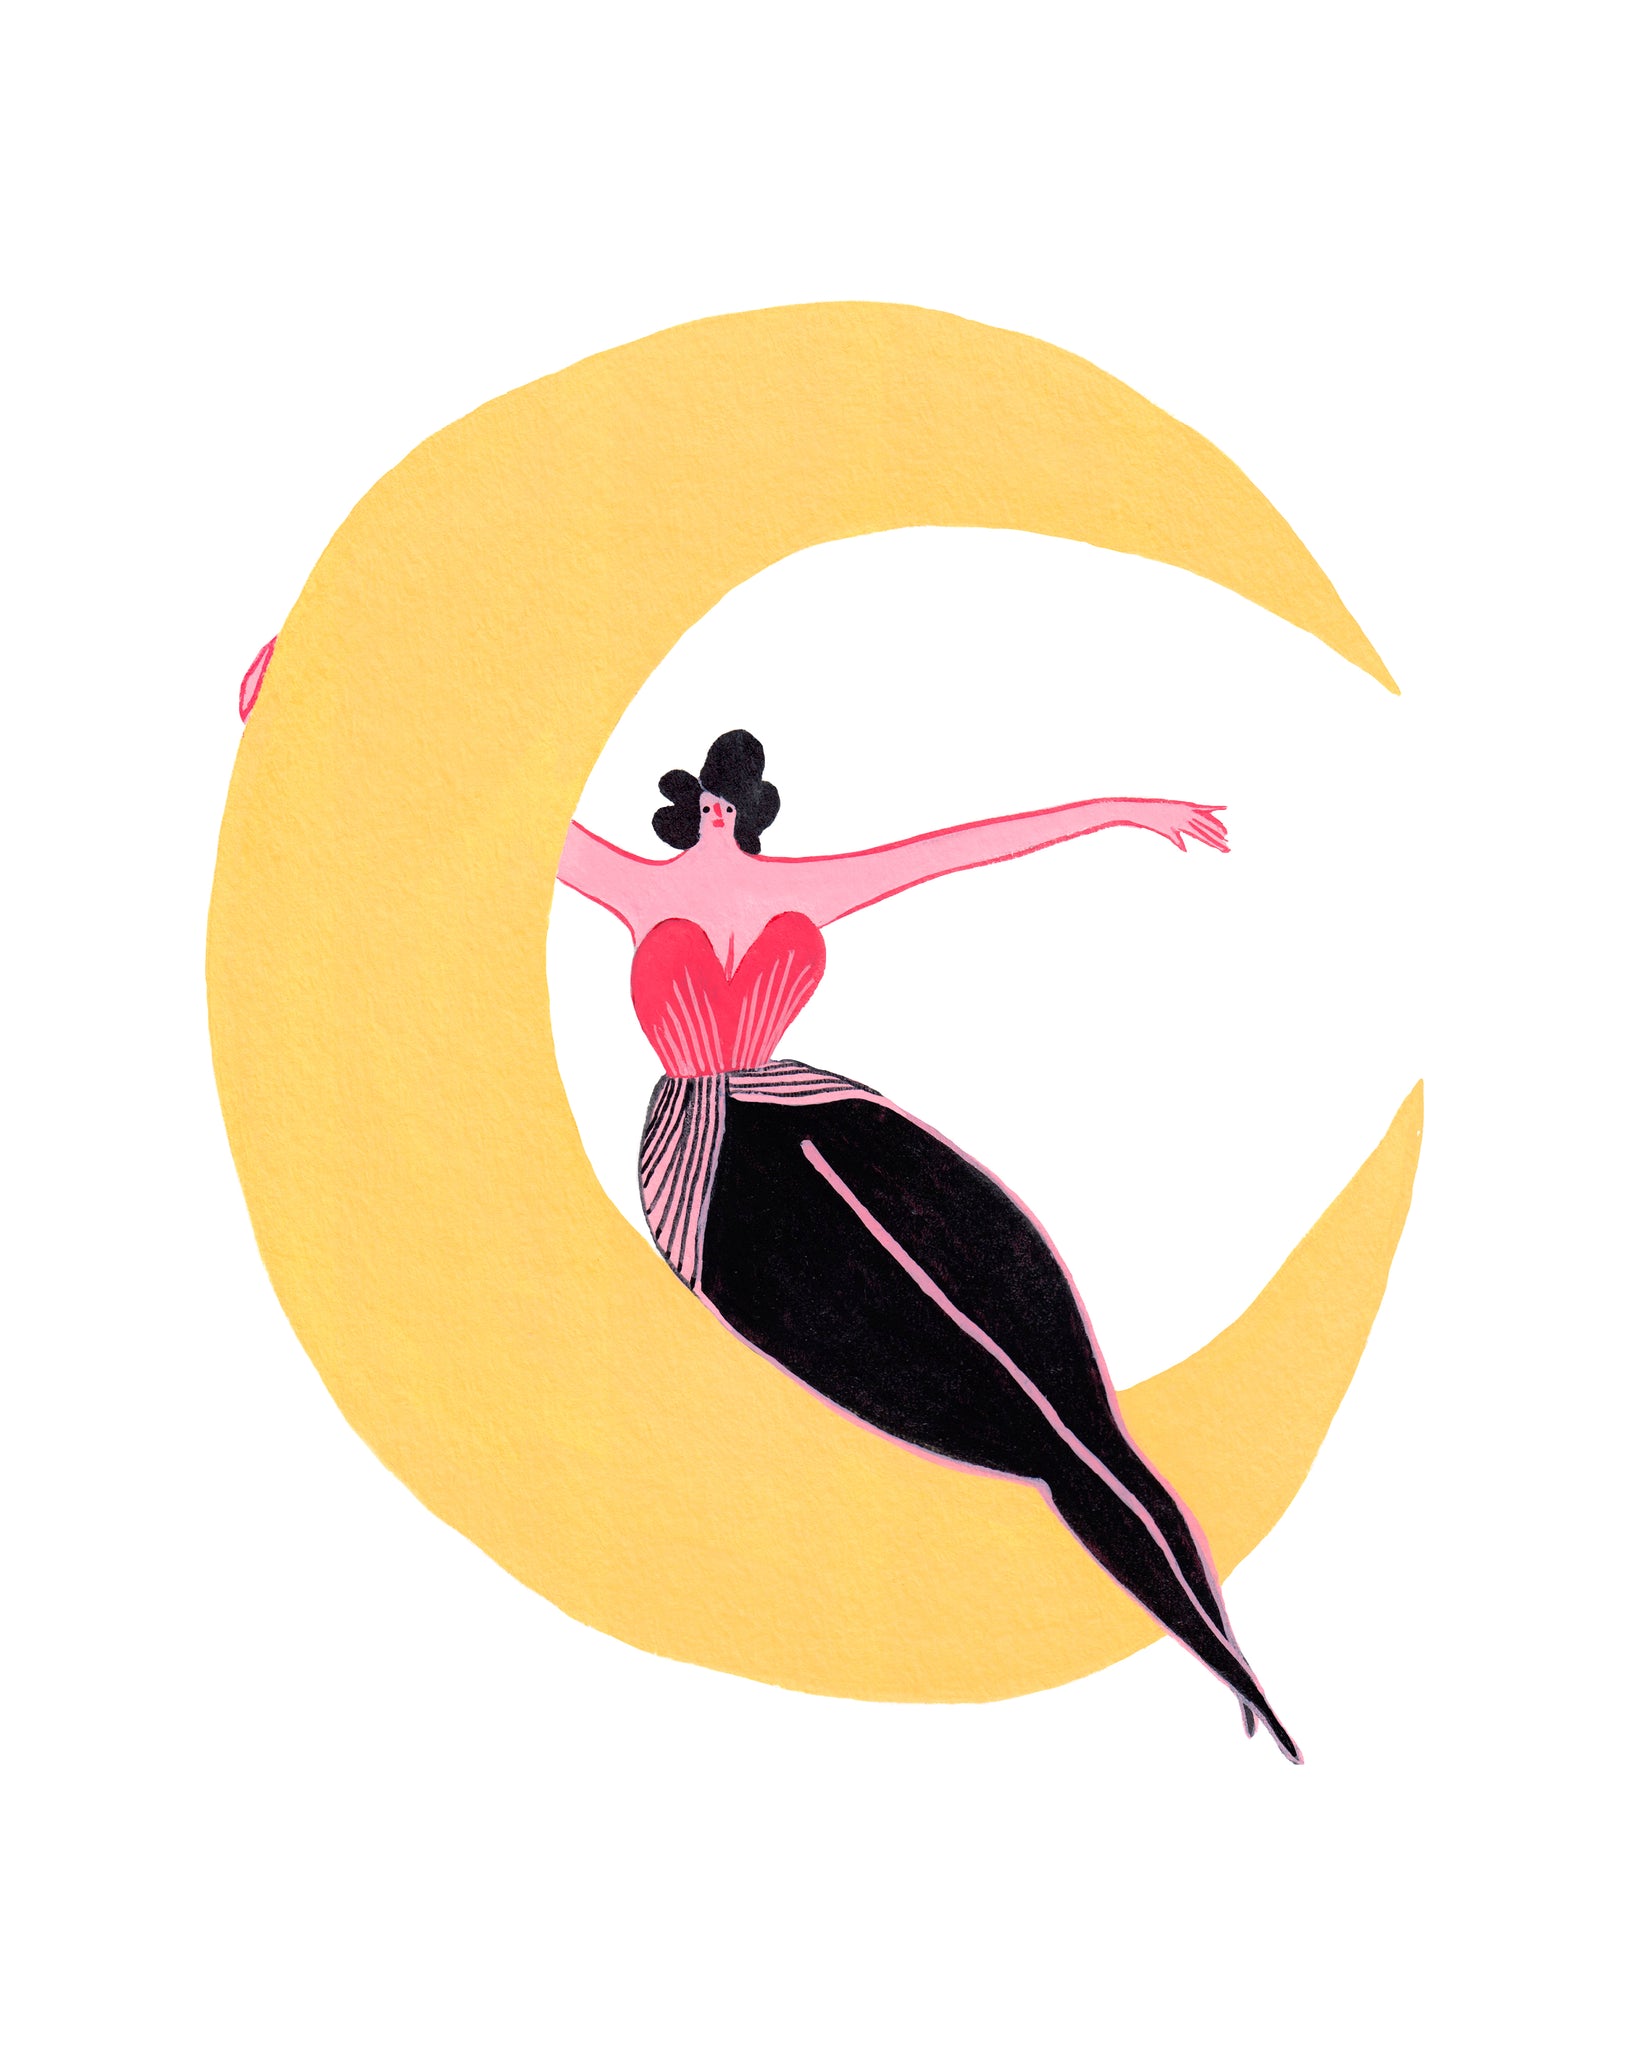 Lady and Moon 8x10in Giclee Print